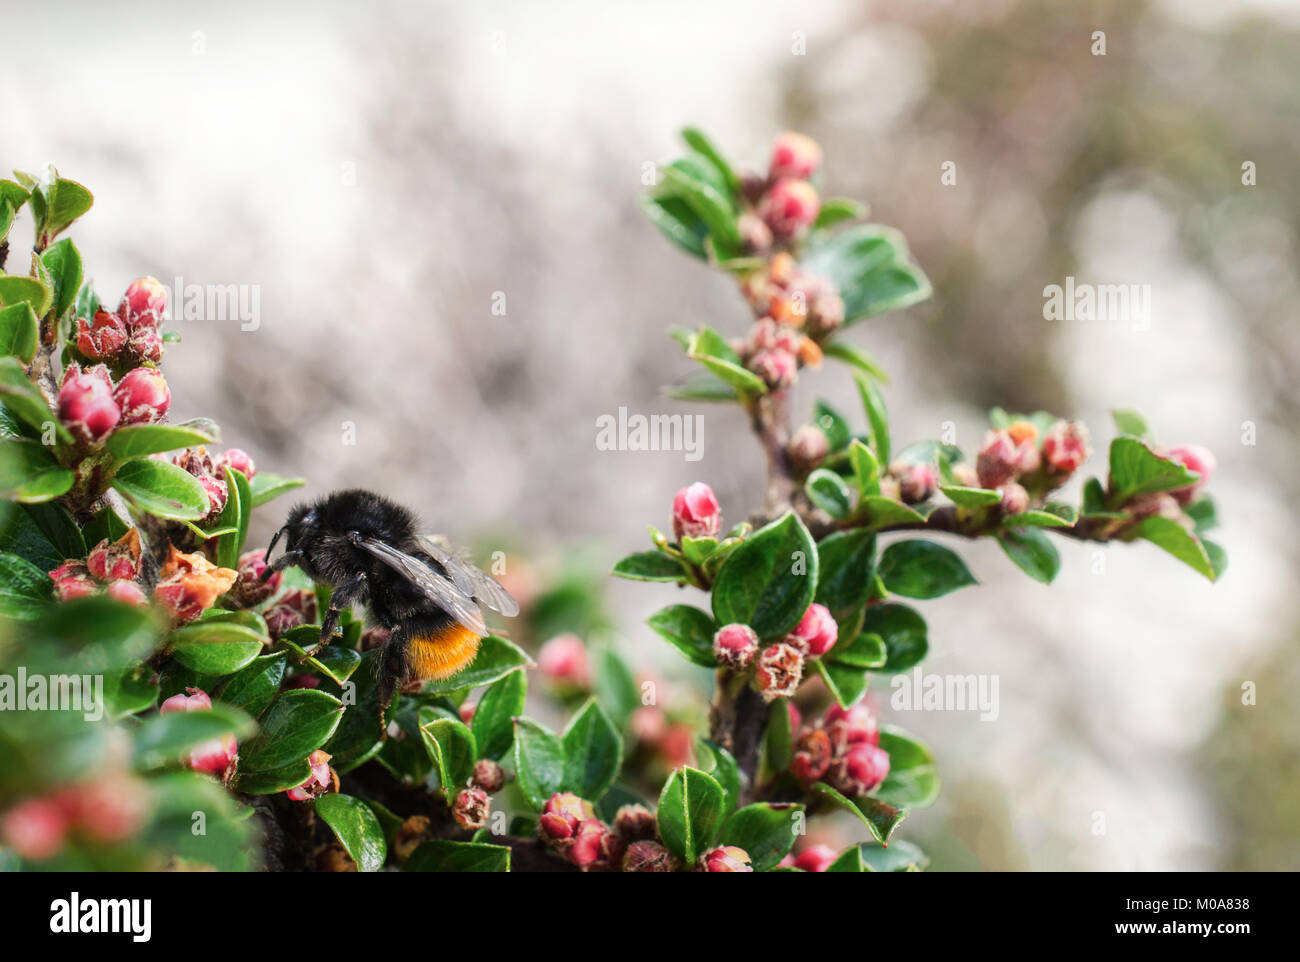 Red tailed bumblebee (Bombus lapidarius) resting on a plant with red berries, Woodstock, UK Stock Photo